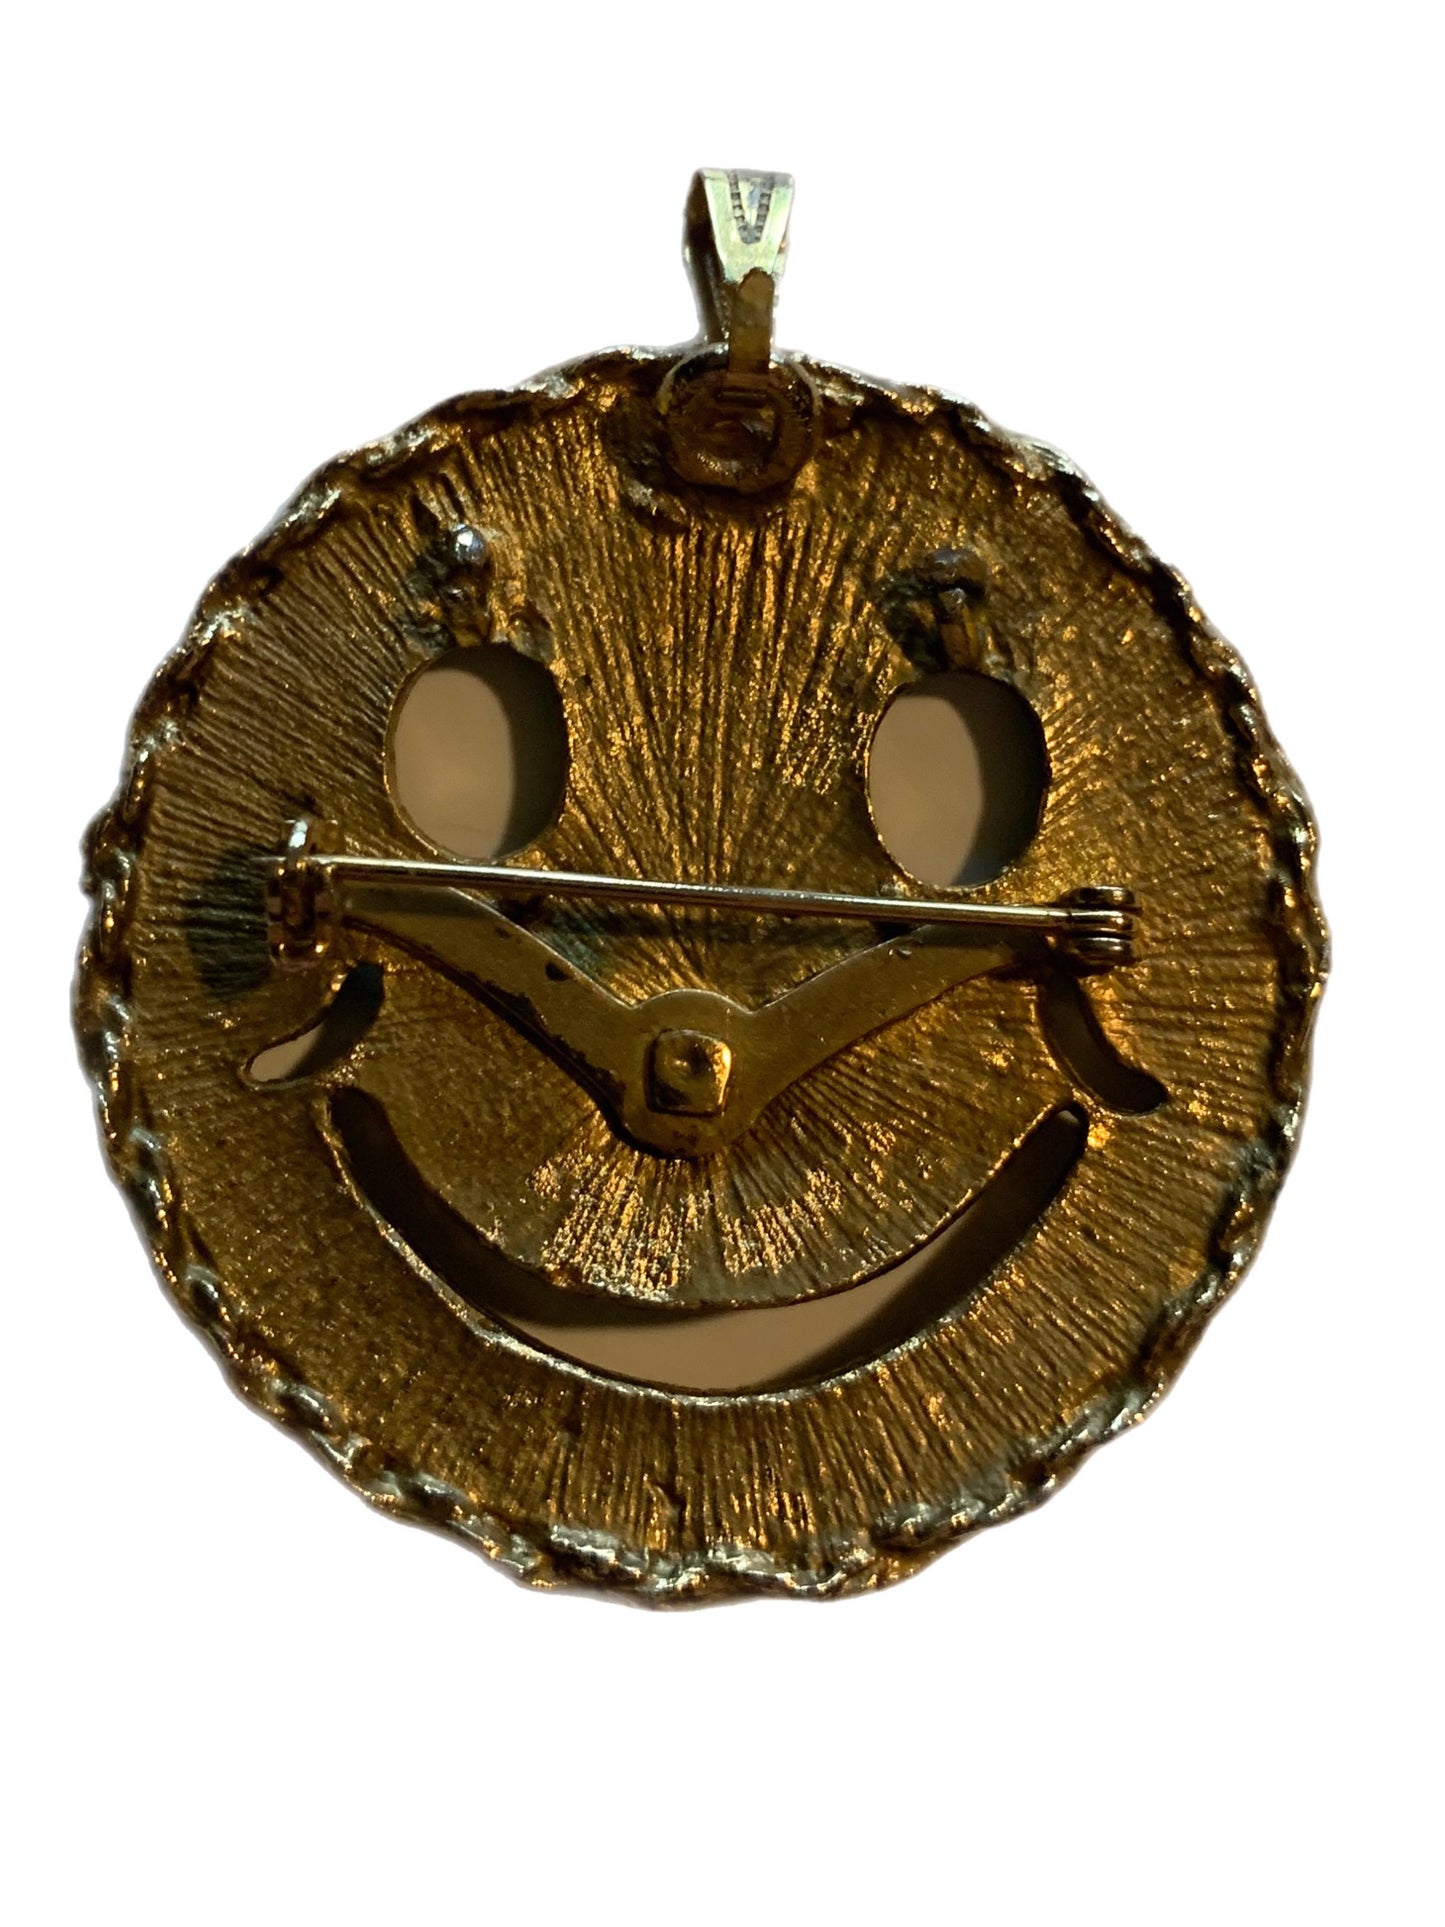 Stylized Brushed Gold Metal Happy Face Brooch/Pendant circa 1970s